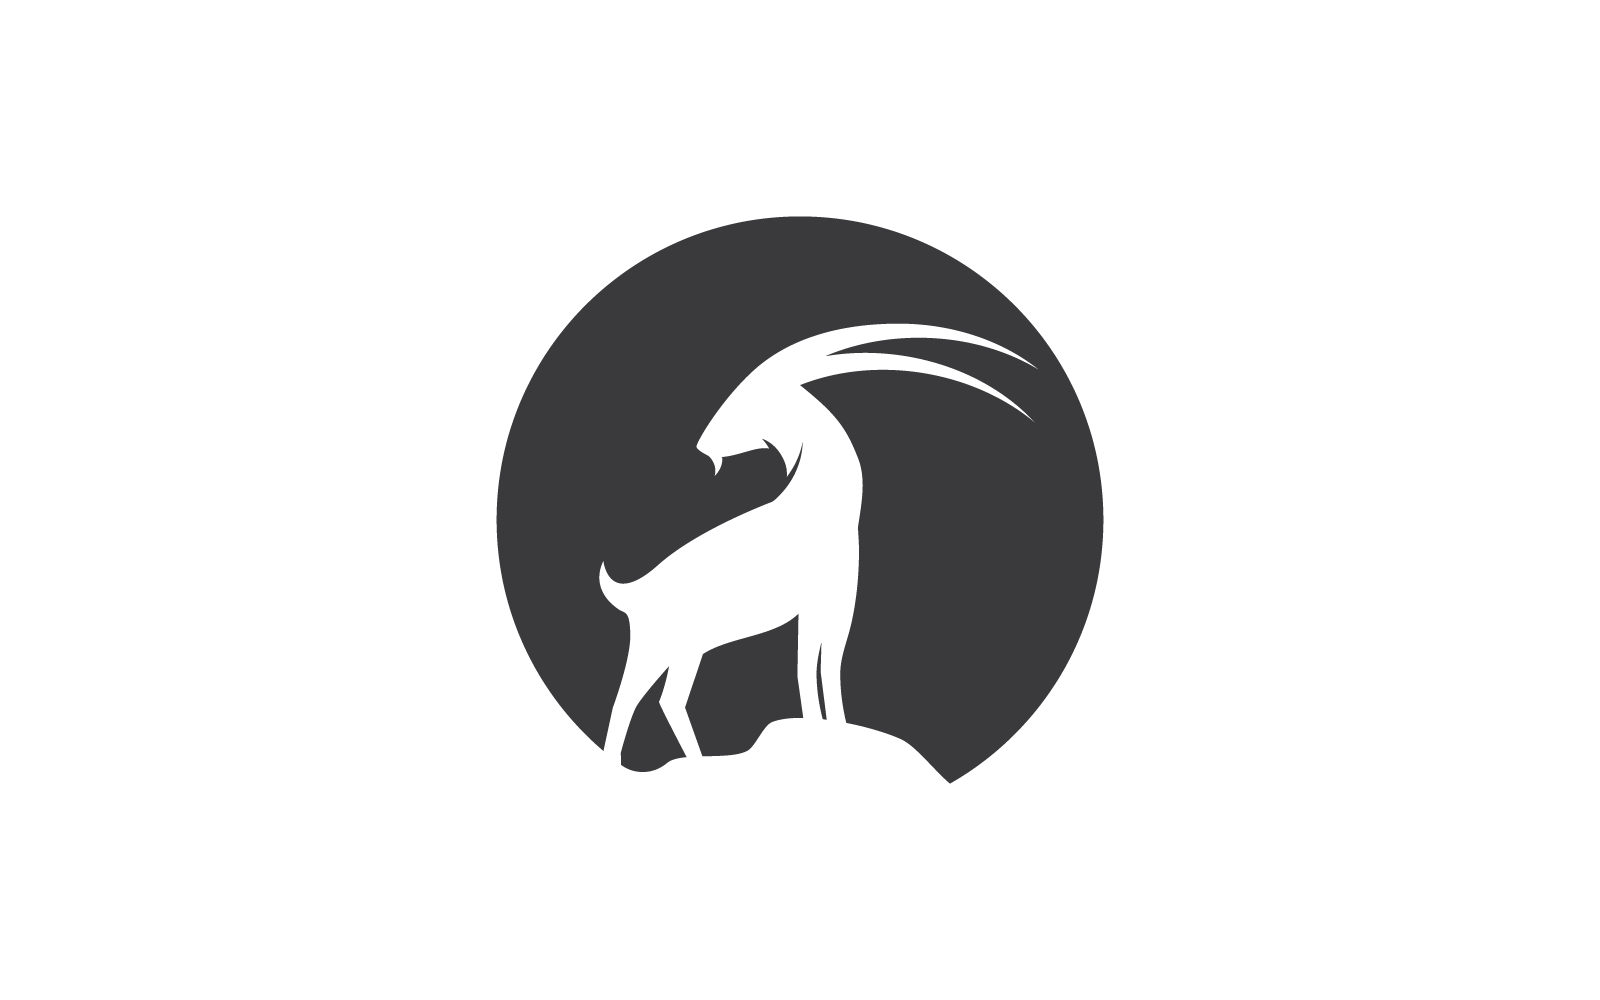 Goat and sheep illustration template vector design